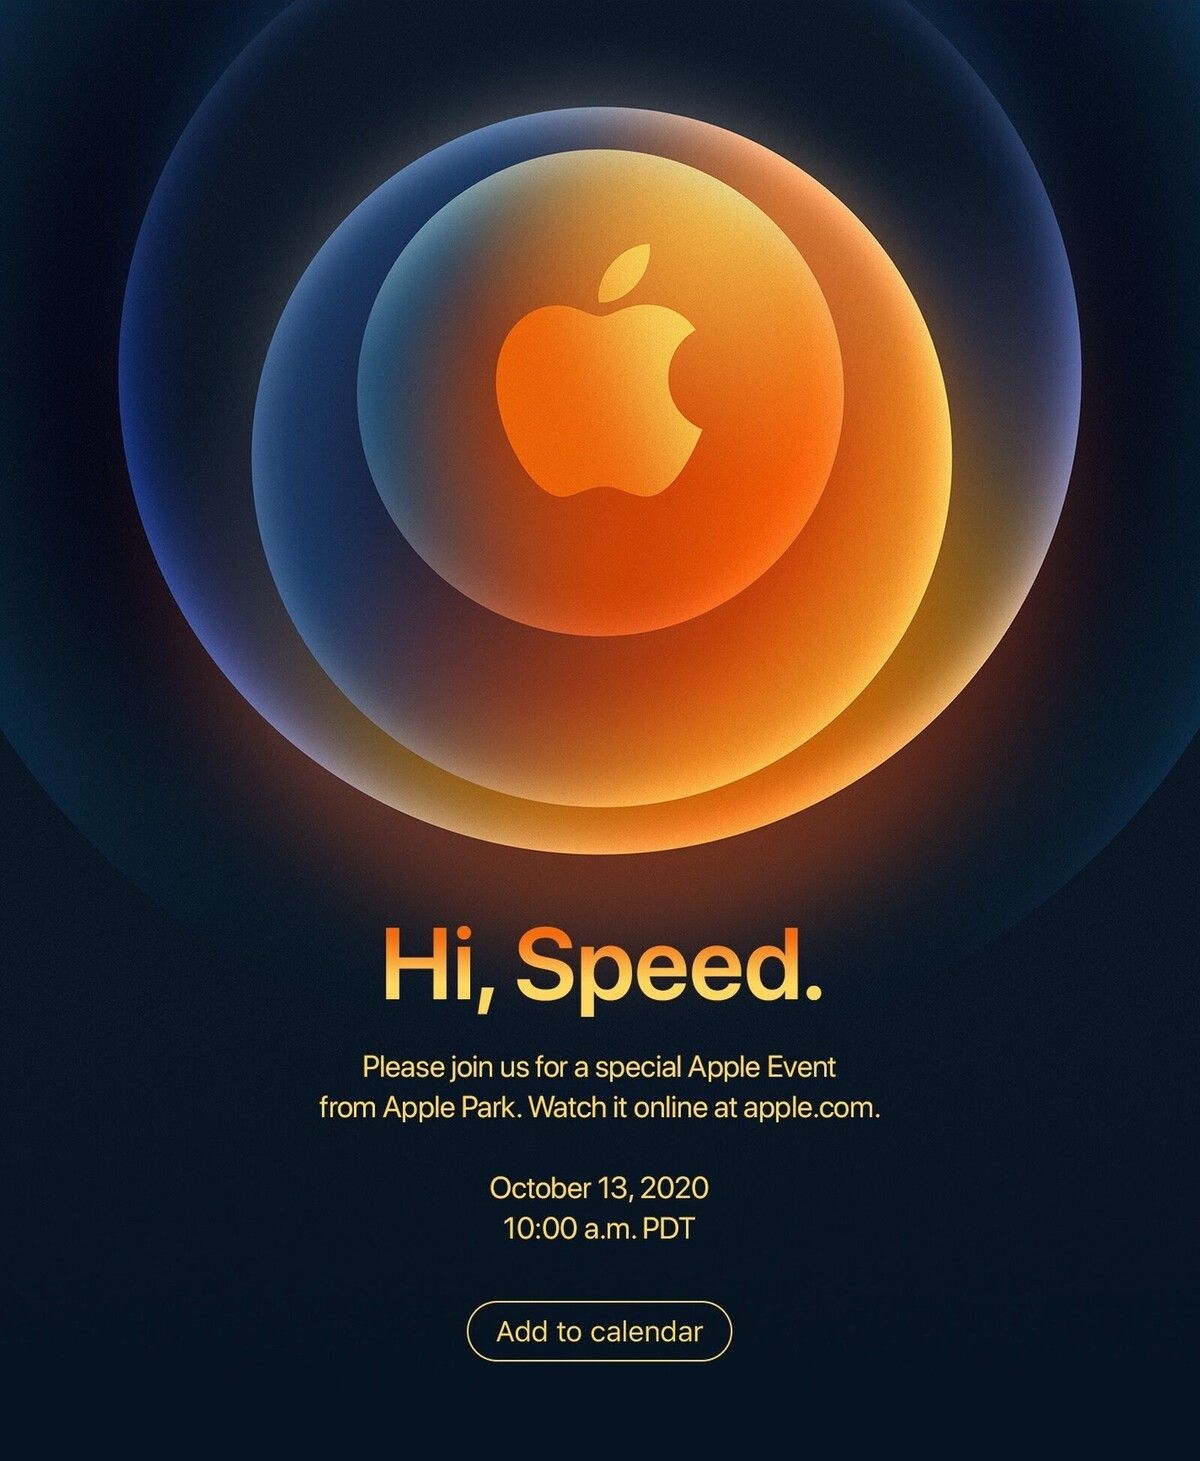 Apple's Event Calendar: 'hi, Speed' Event To Take Place On